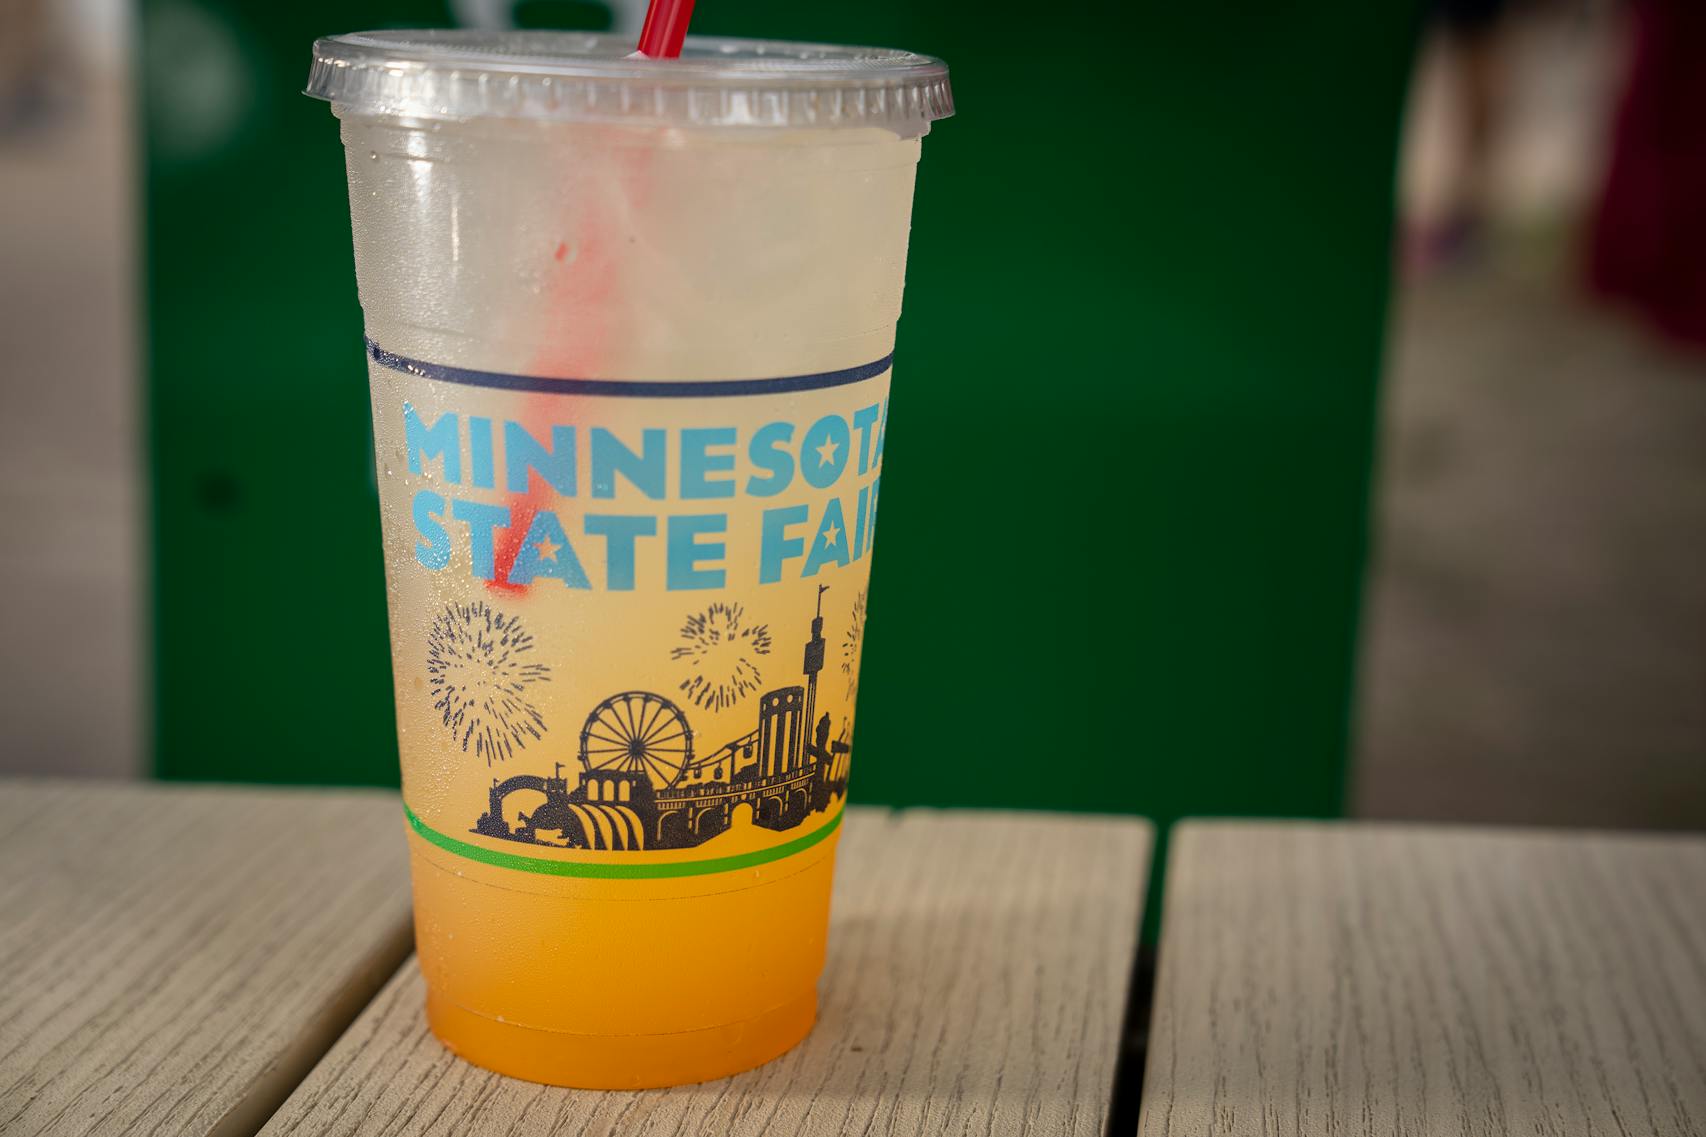 Island Lemonade from Island Noodles. The new foods of the 2023 Minnesota State Fair photographed on the first day of the fair in Falcon Heights, Minn. on Tuesday, Aug. 8, 2023. ] LEILA NAVIDI • leila.navidi@startribune.com